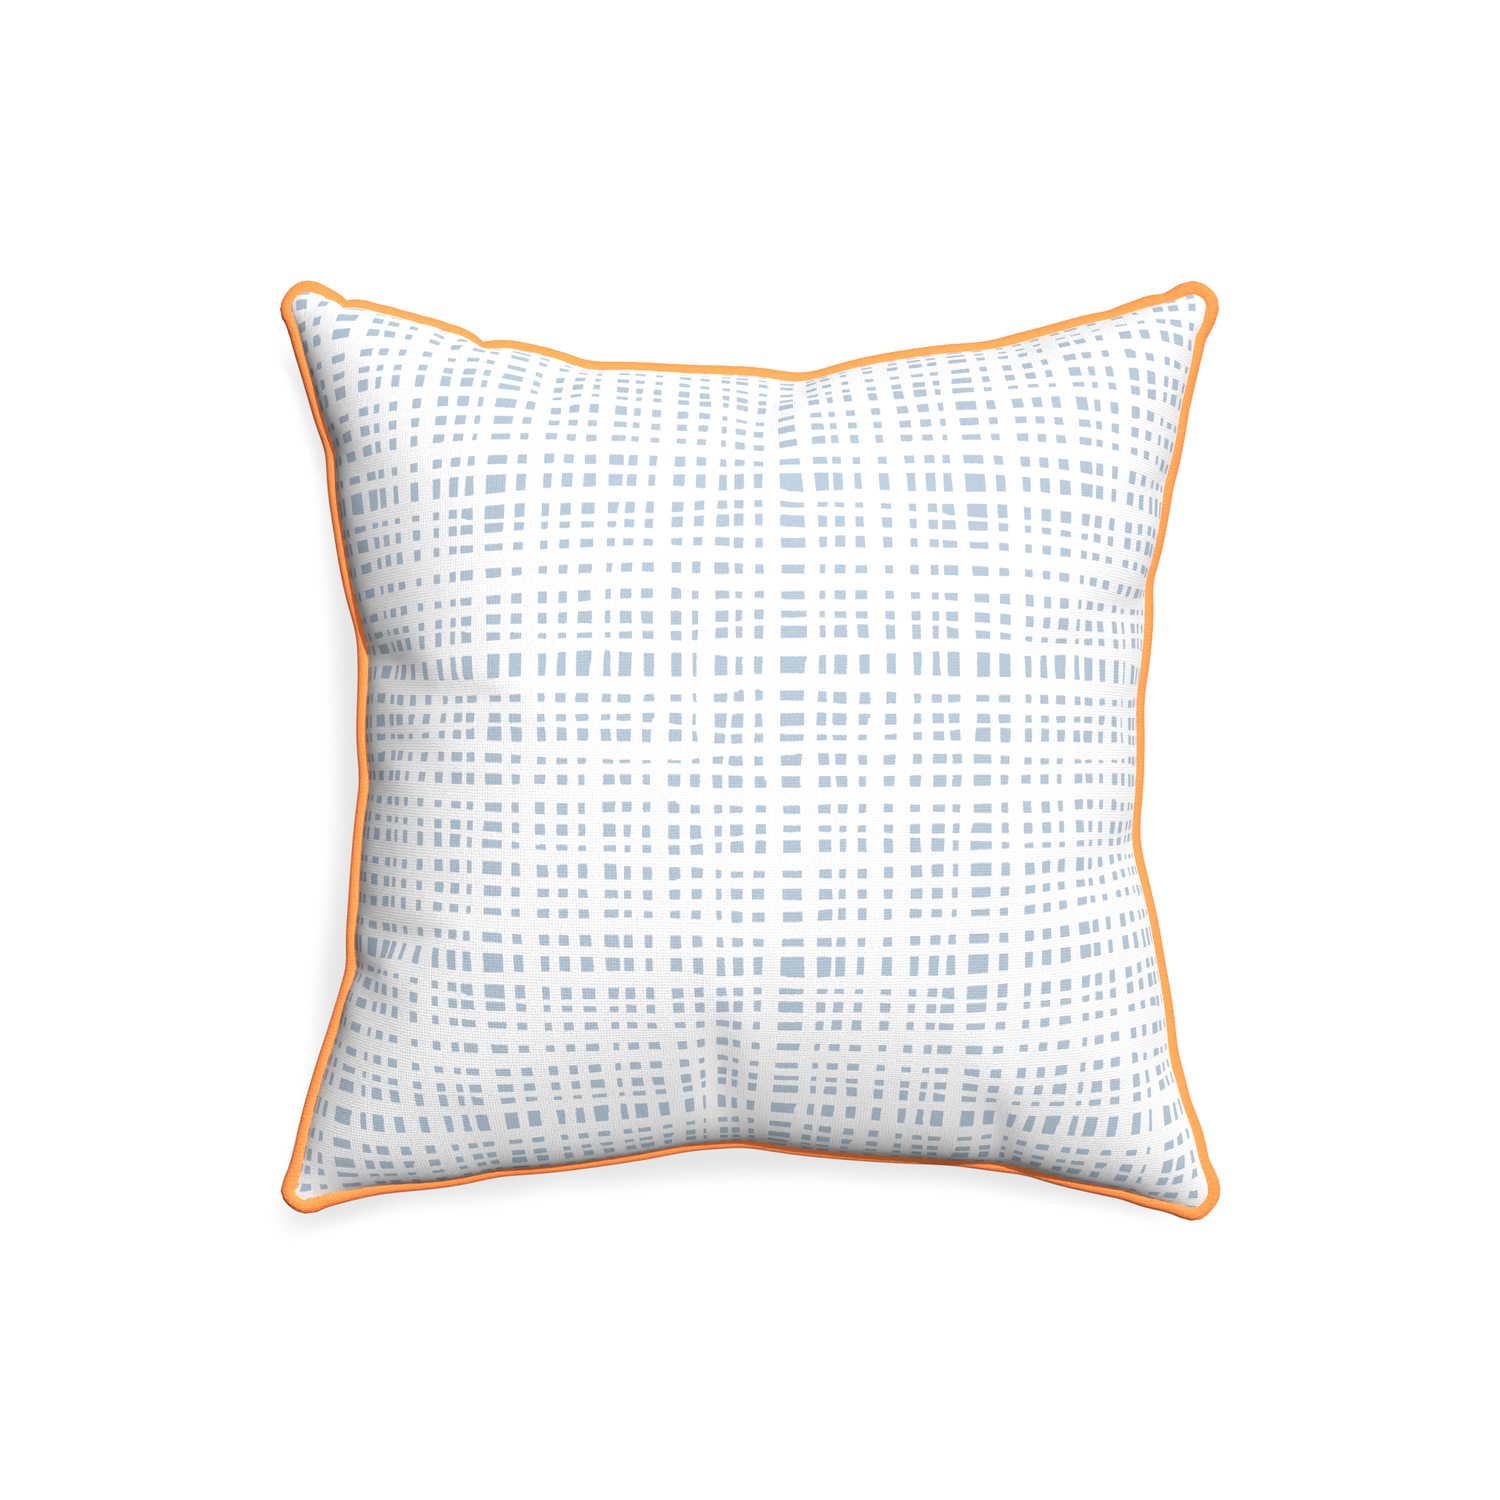 20-square ginger custom plaid sky bluepillow with clementine piping on white background